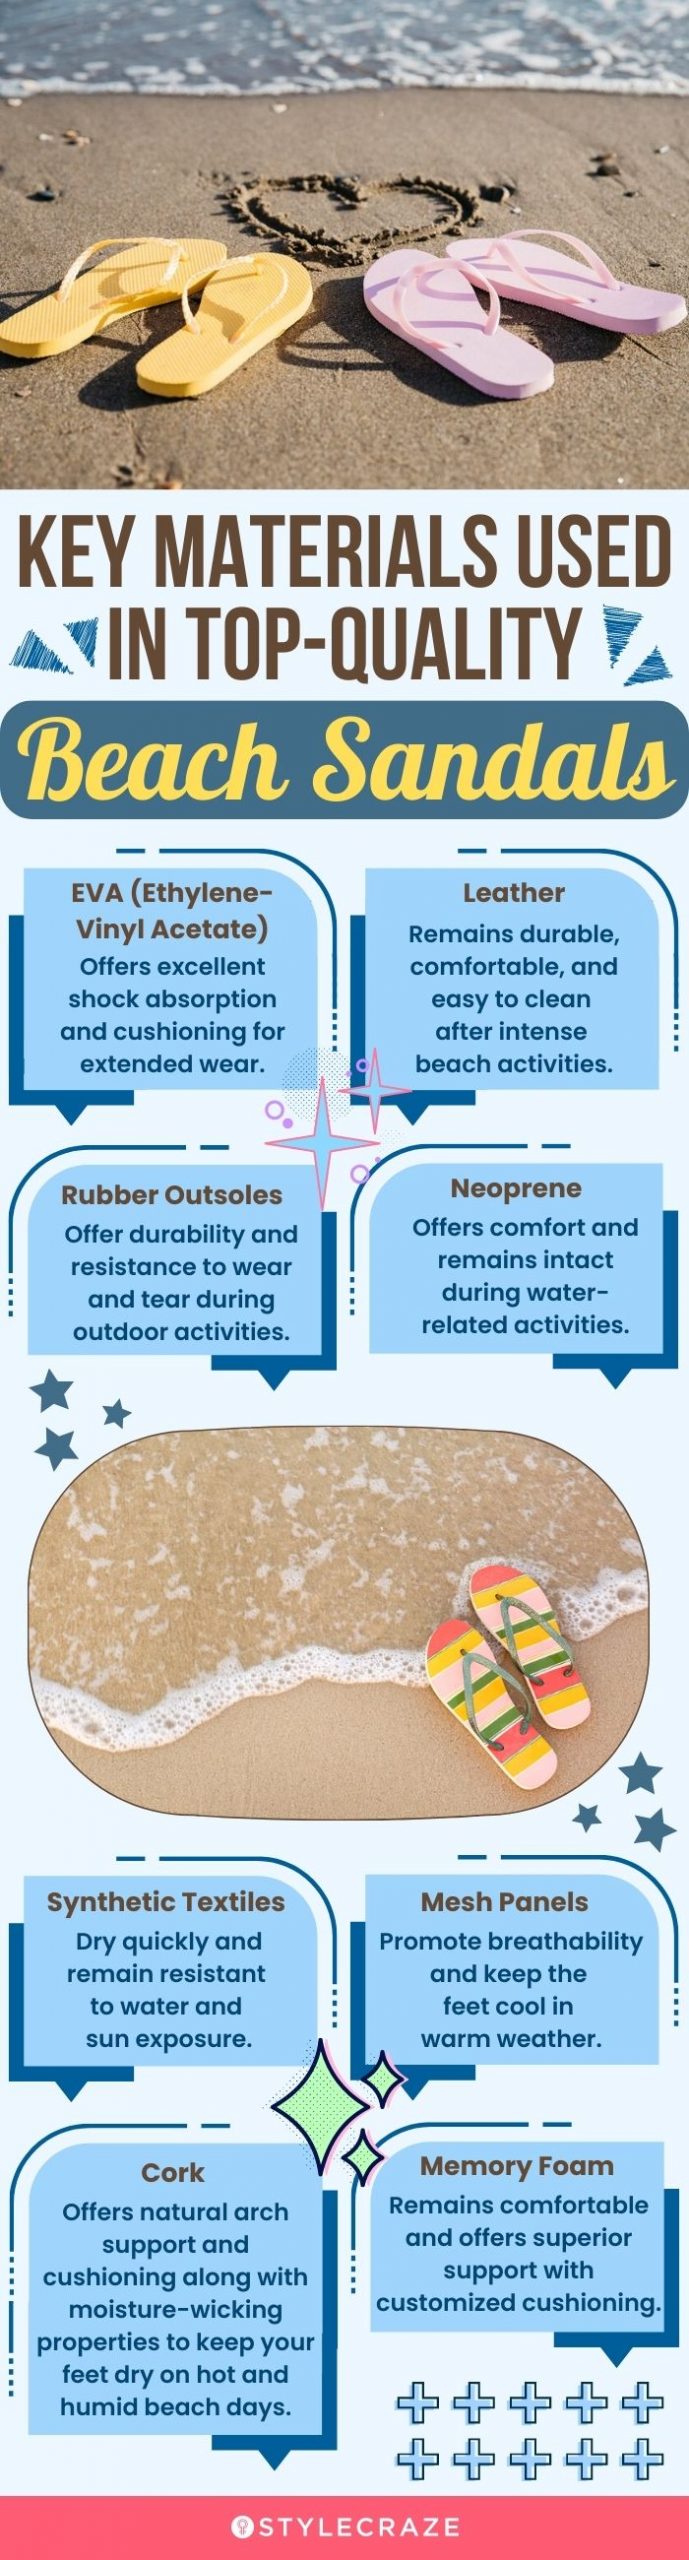 Key Materials Used In Top-Quality Beach Sandals (infographic)